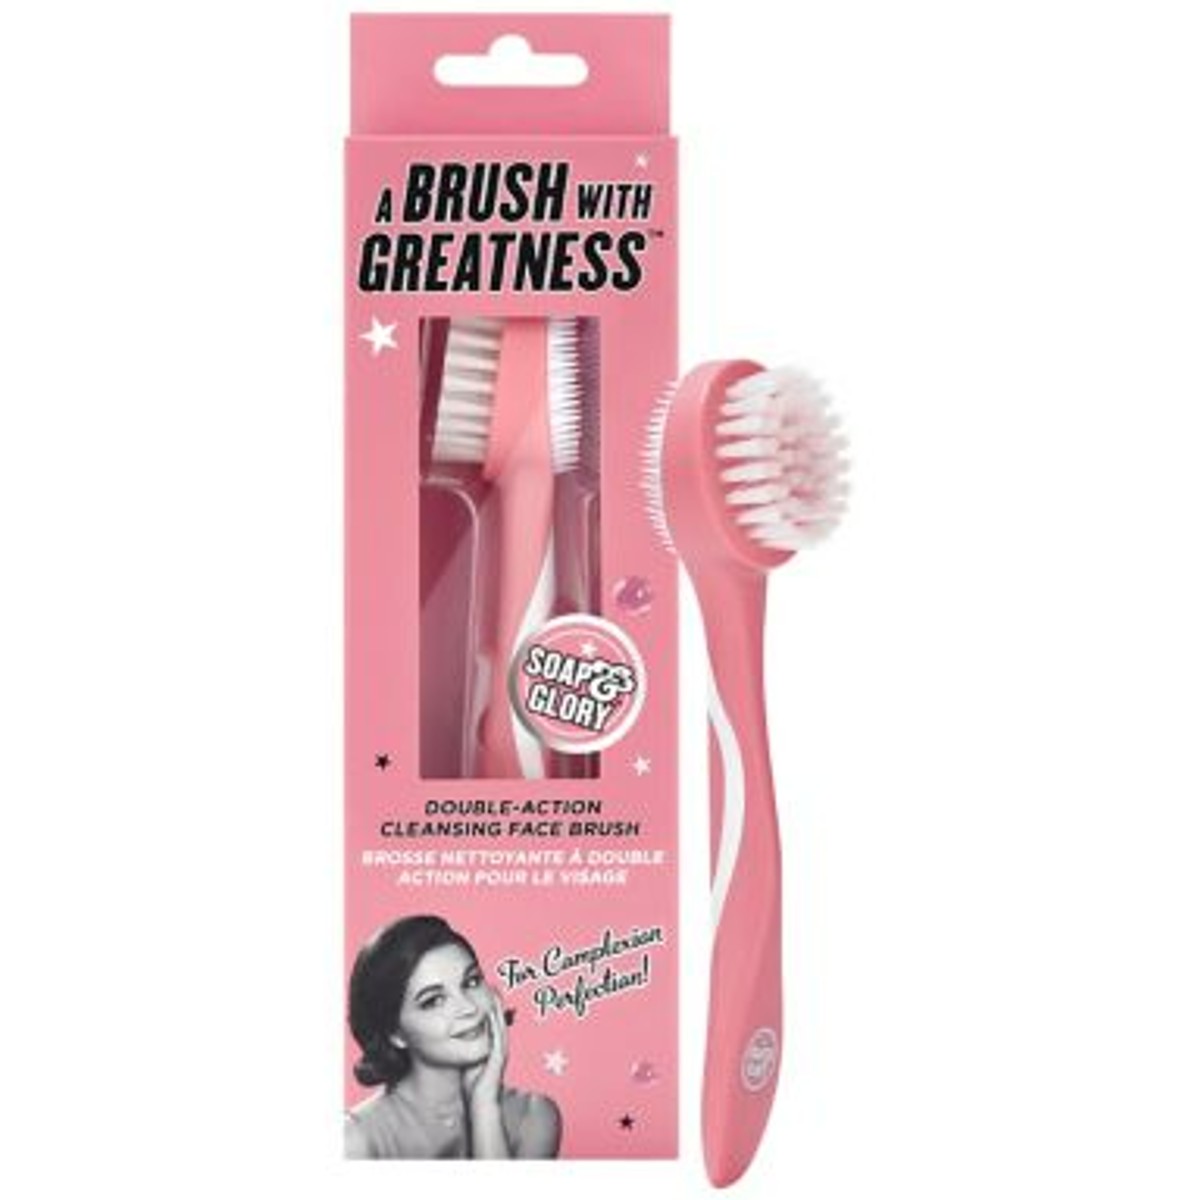 A Brush With Greatness Exfoliating Face Brush 